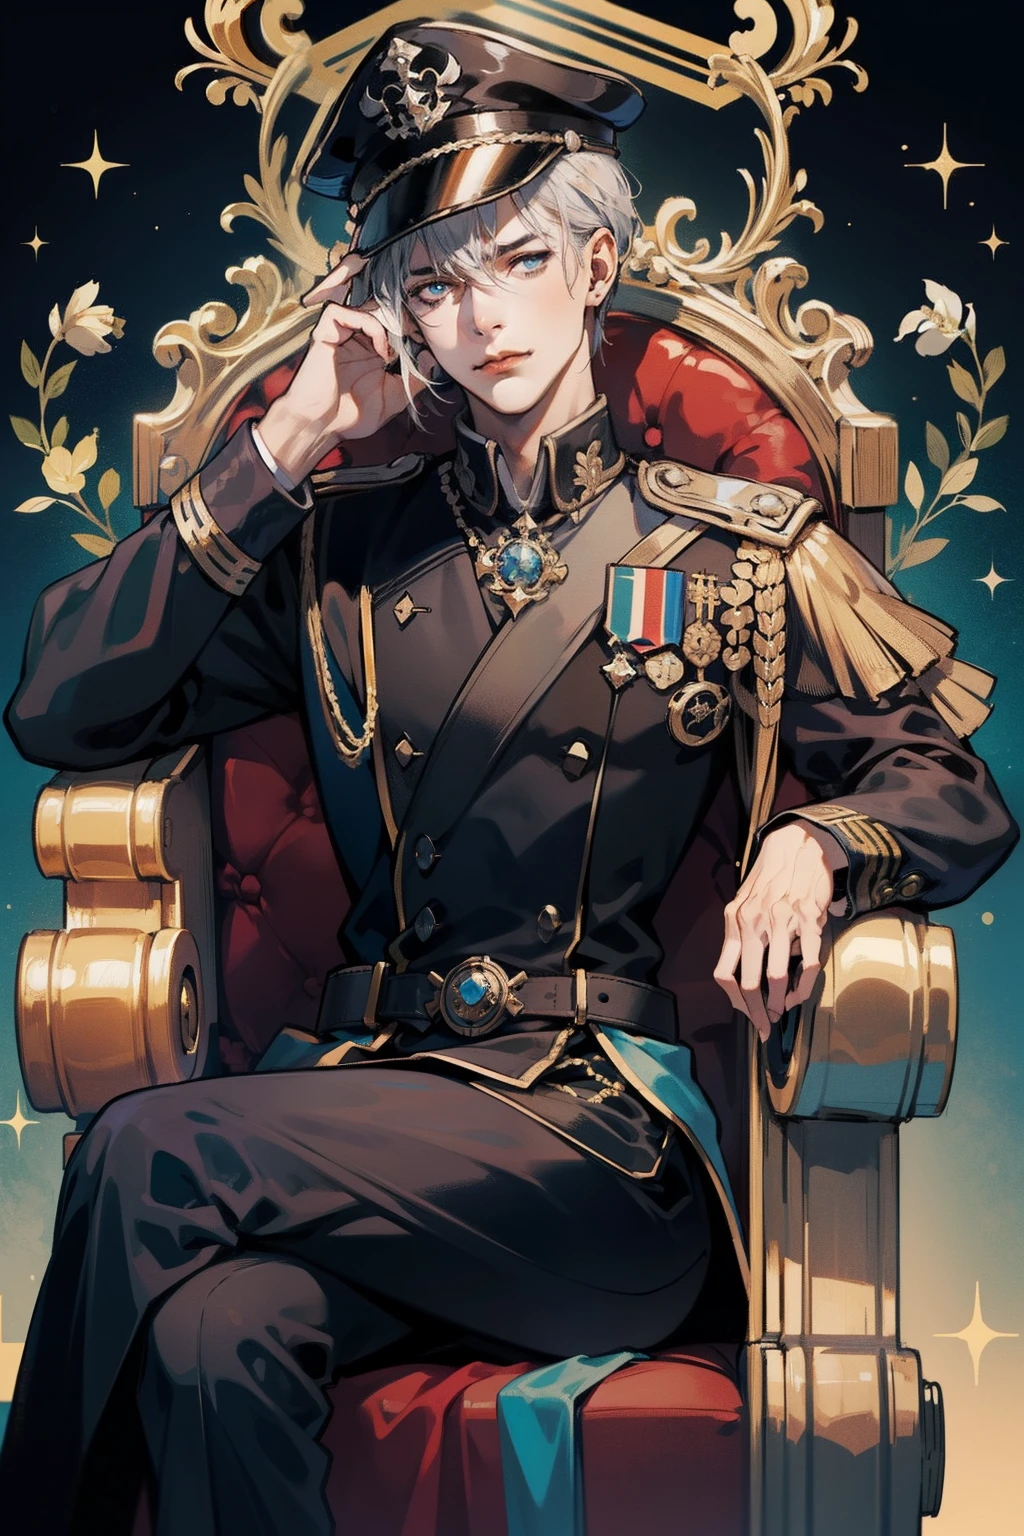 1 man, short black hair, red pupils, good looking, ear rings, jewellery, Sits on a great throne, pale skin, scar on the face, Black high-level military uniform with gold and silver accessory, Peaked cap, royal, Ruler, Dark Amtosphere, sublime view, confident, crossed legs, elegant, full entire body, ultra details, lot of details, hight resolution, proporções perfeitas, sharp look, silky hair, throncole, marmor, elegant pose, Beautiful  eyes,